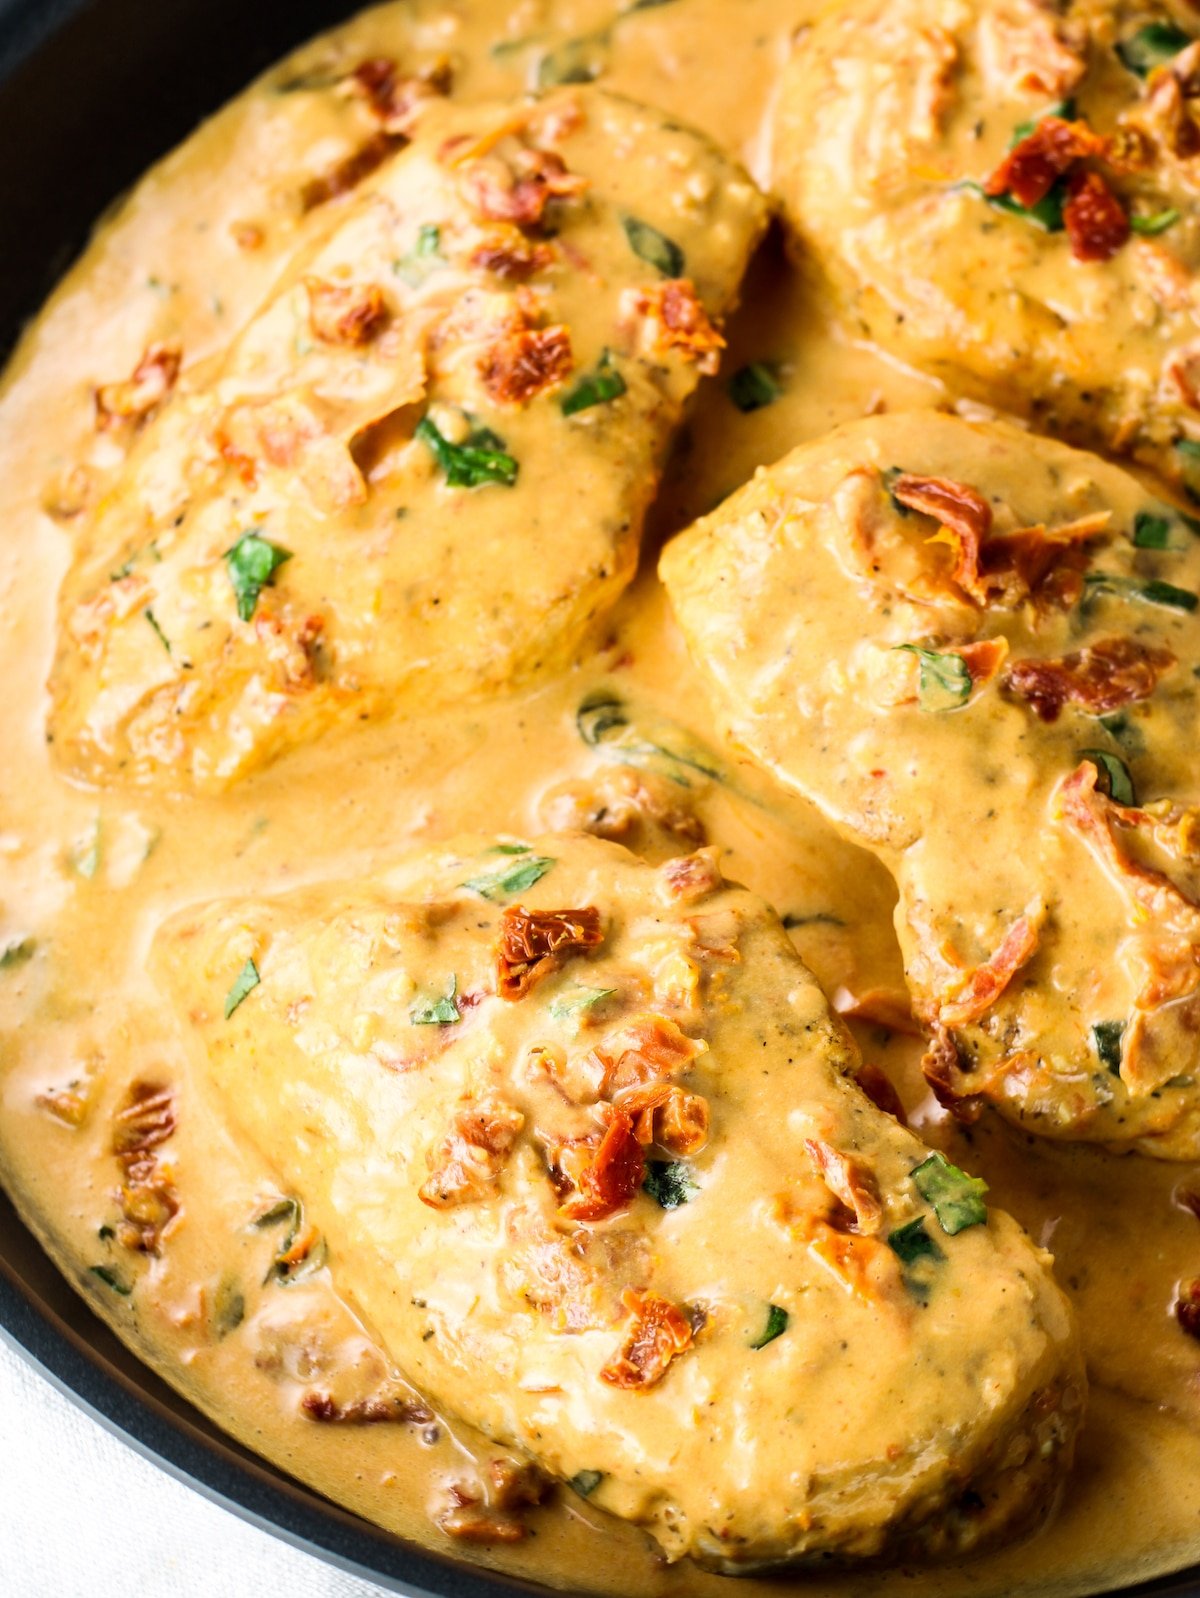 A very close-up photo of a saute pan with cooked chicken breasts in a creamy sun-dried tomato sauce.